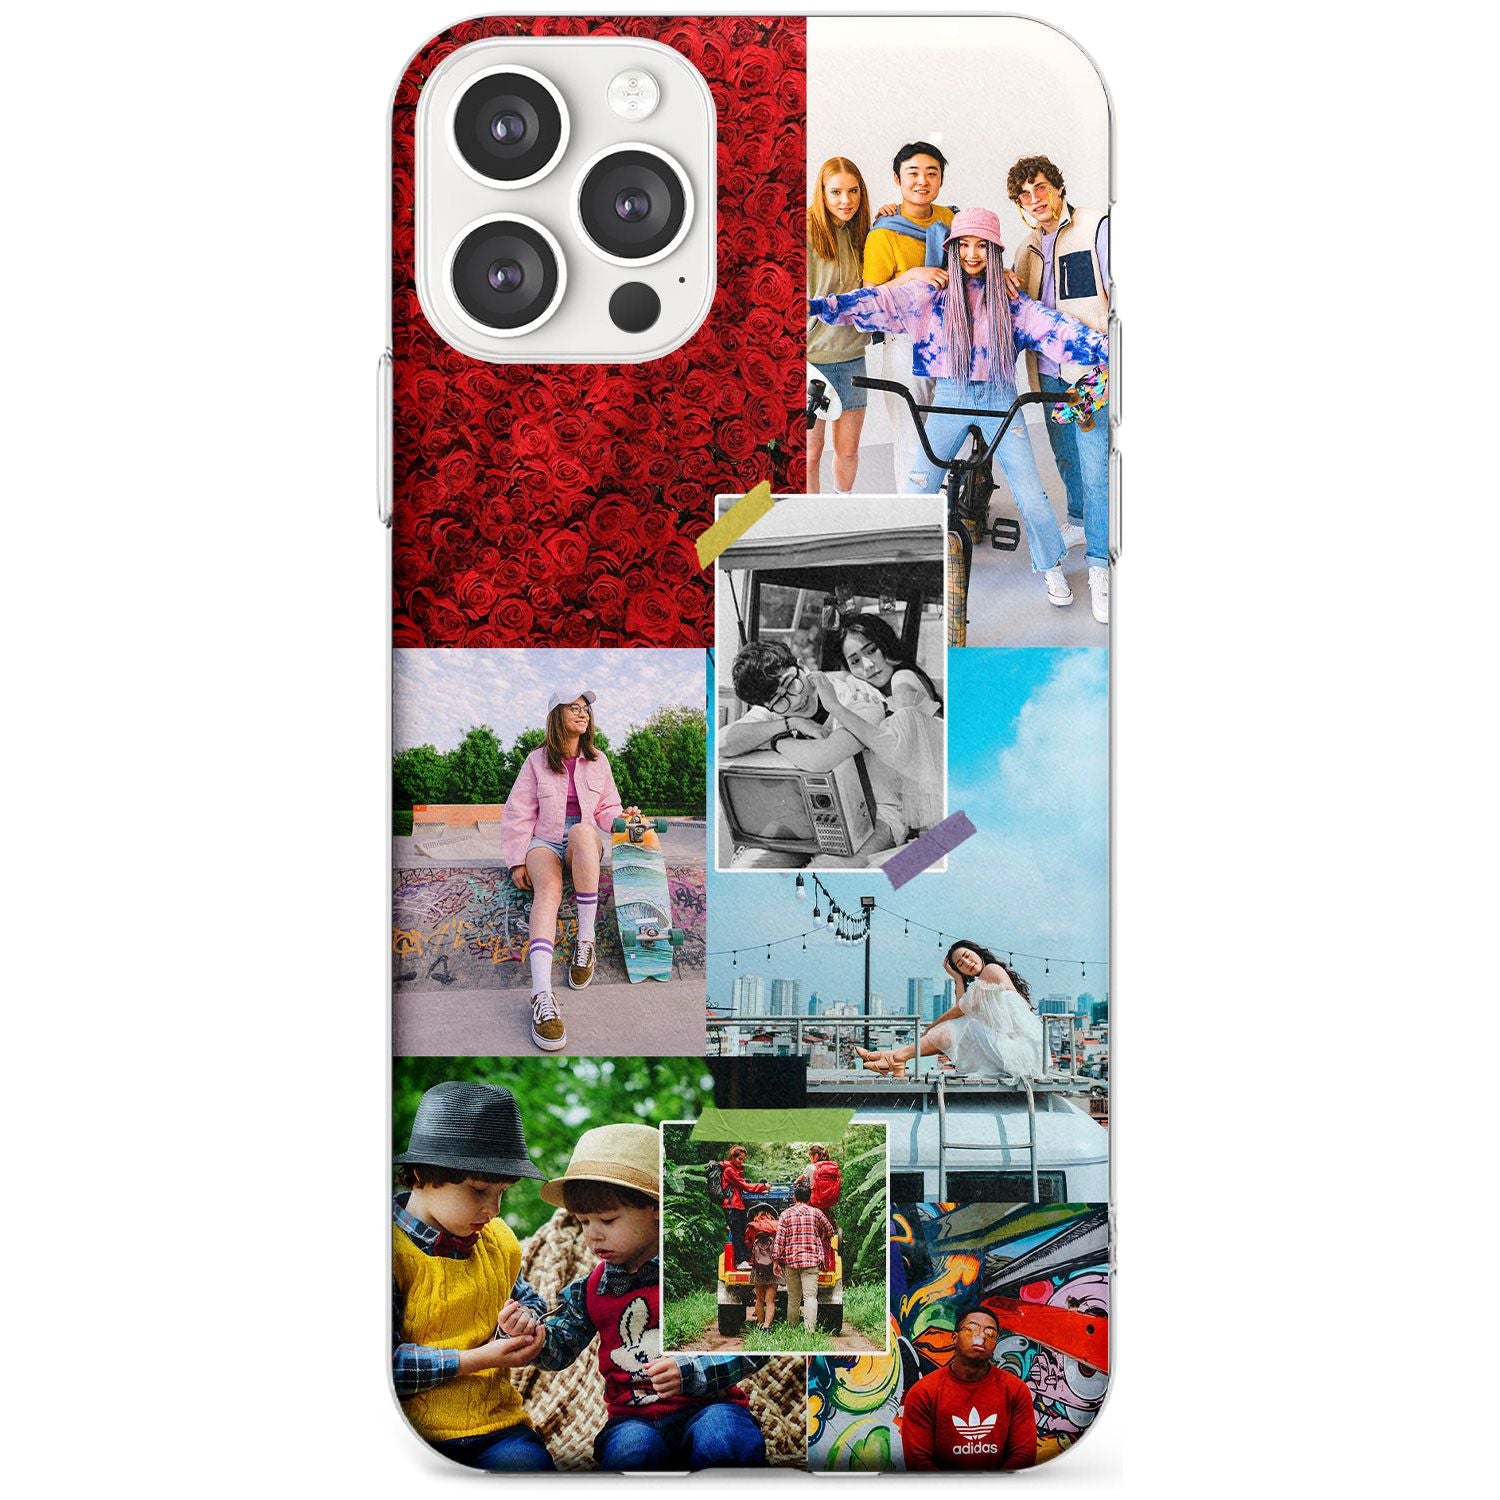 Personalised Photo Collage Slim TPU Phone Case for iPhone 11 Pro Max